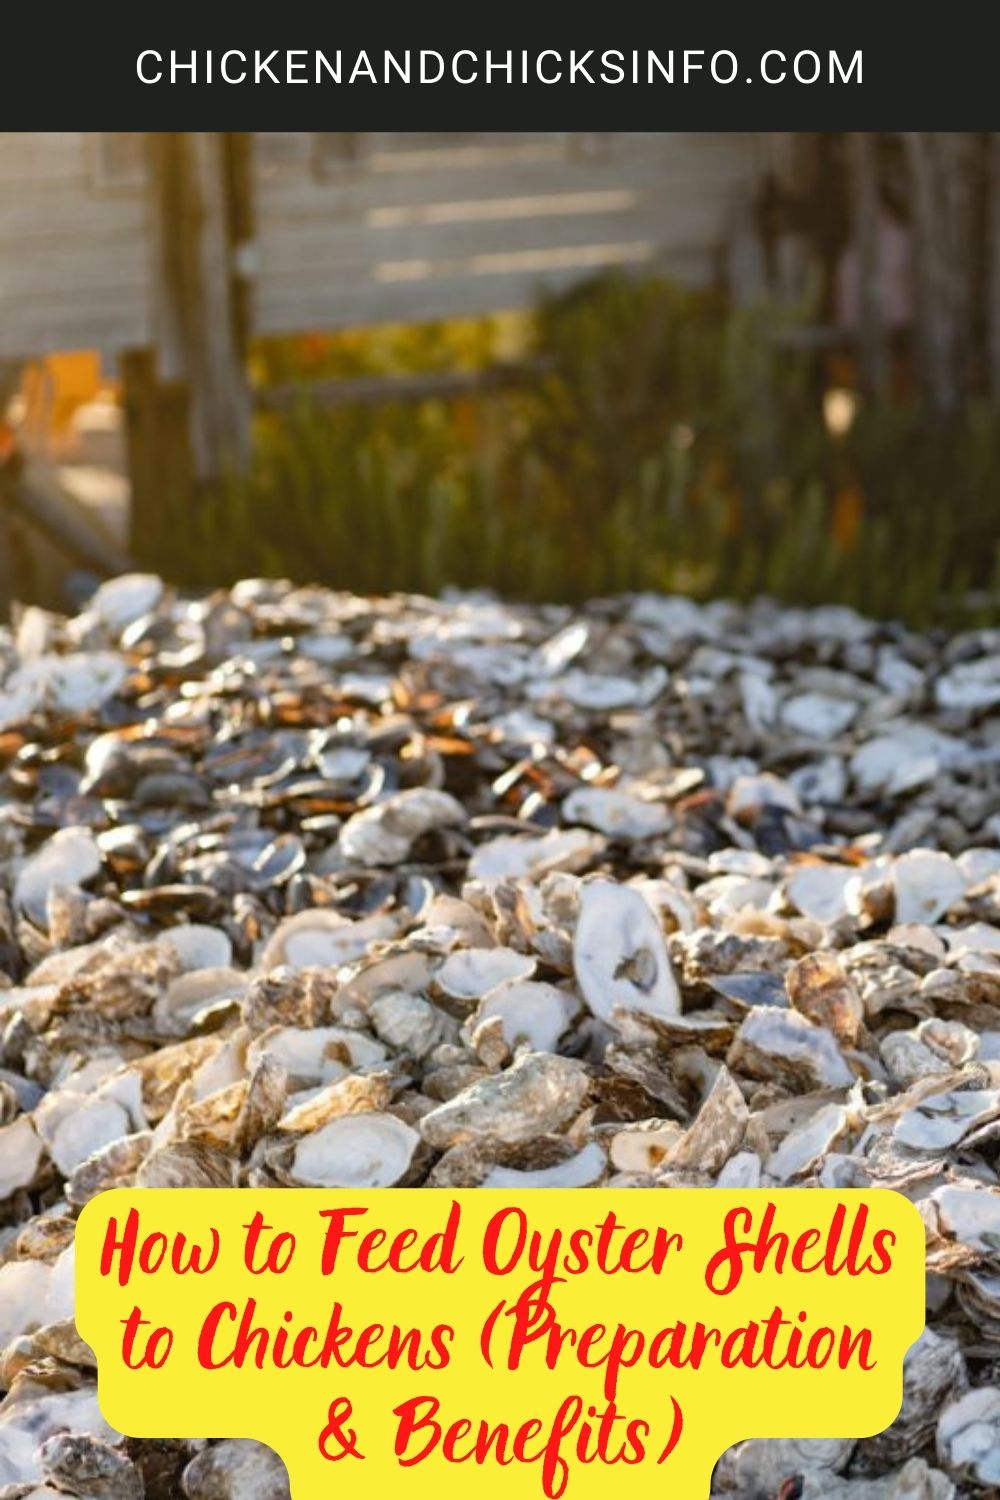 How to Feed Oyster Shells to Chickens (Preparation & Benefits) poster.
